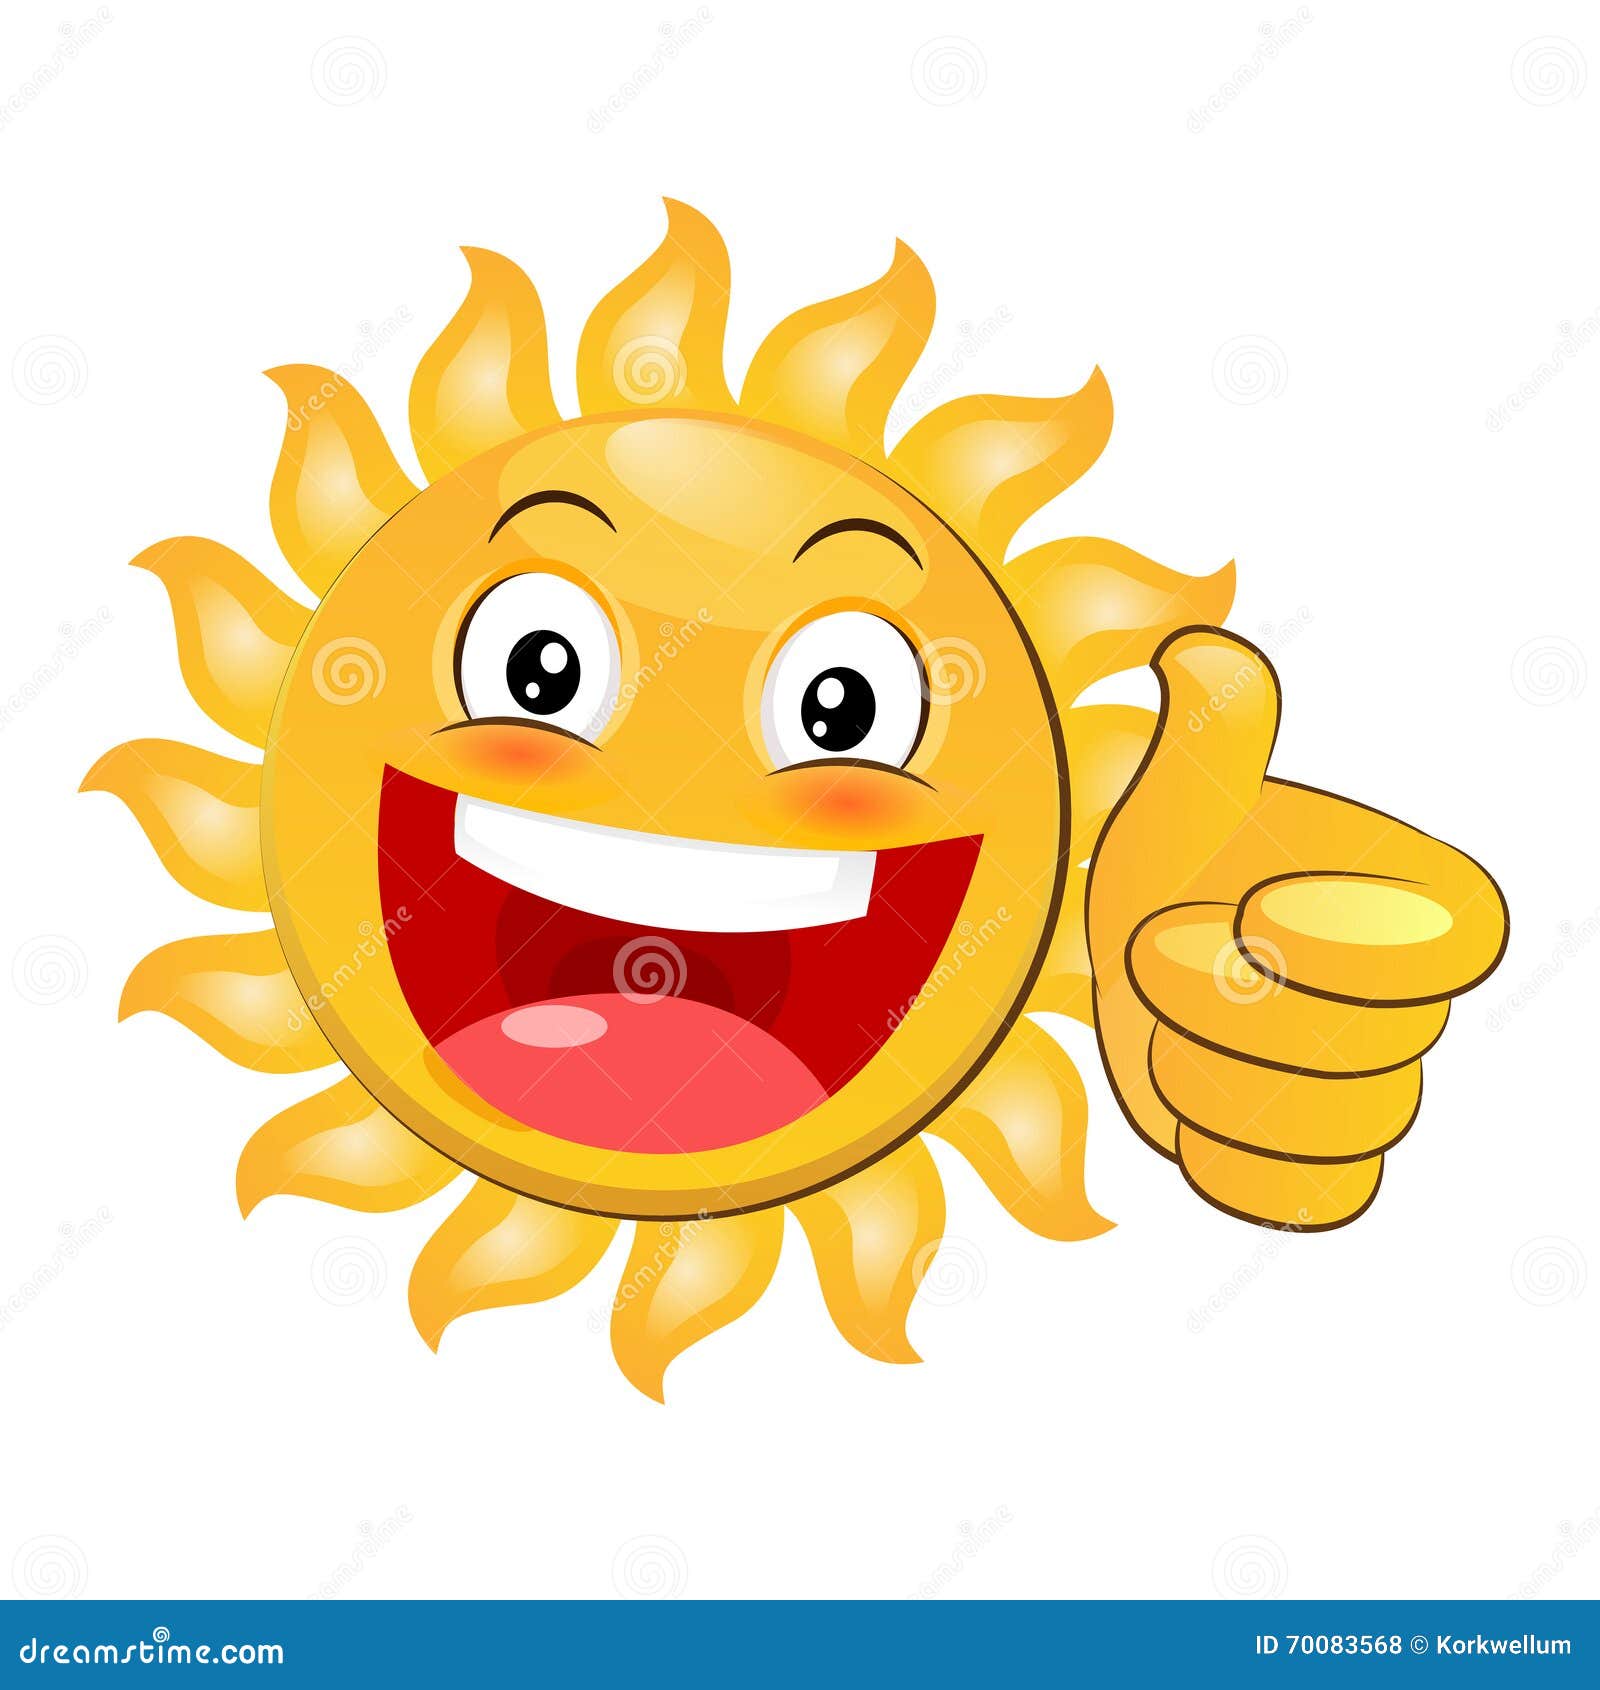 Smiling Yellow Happy Sun Giving A Thumbs Up Cartoon Vector On White Background Stock Vector Illustration Of Mascot Season